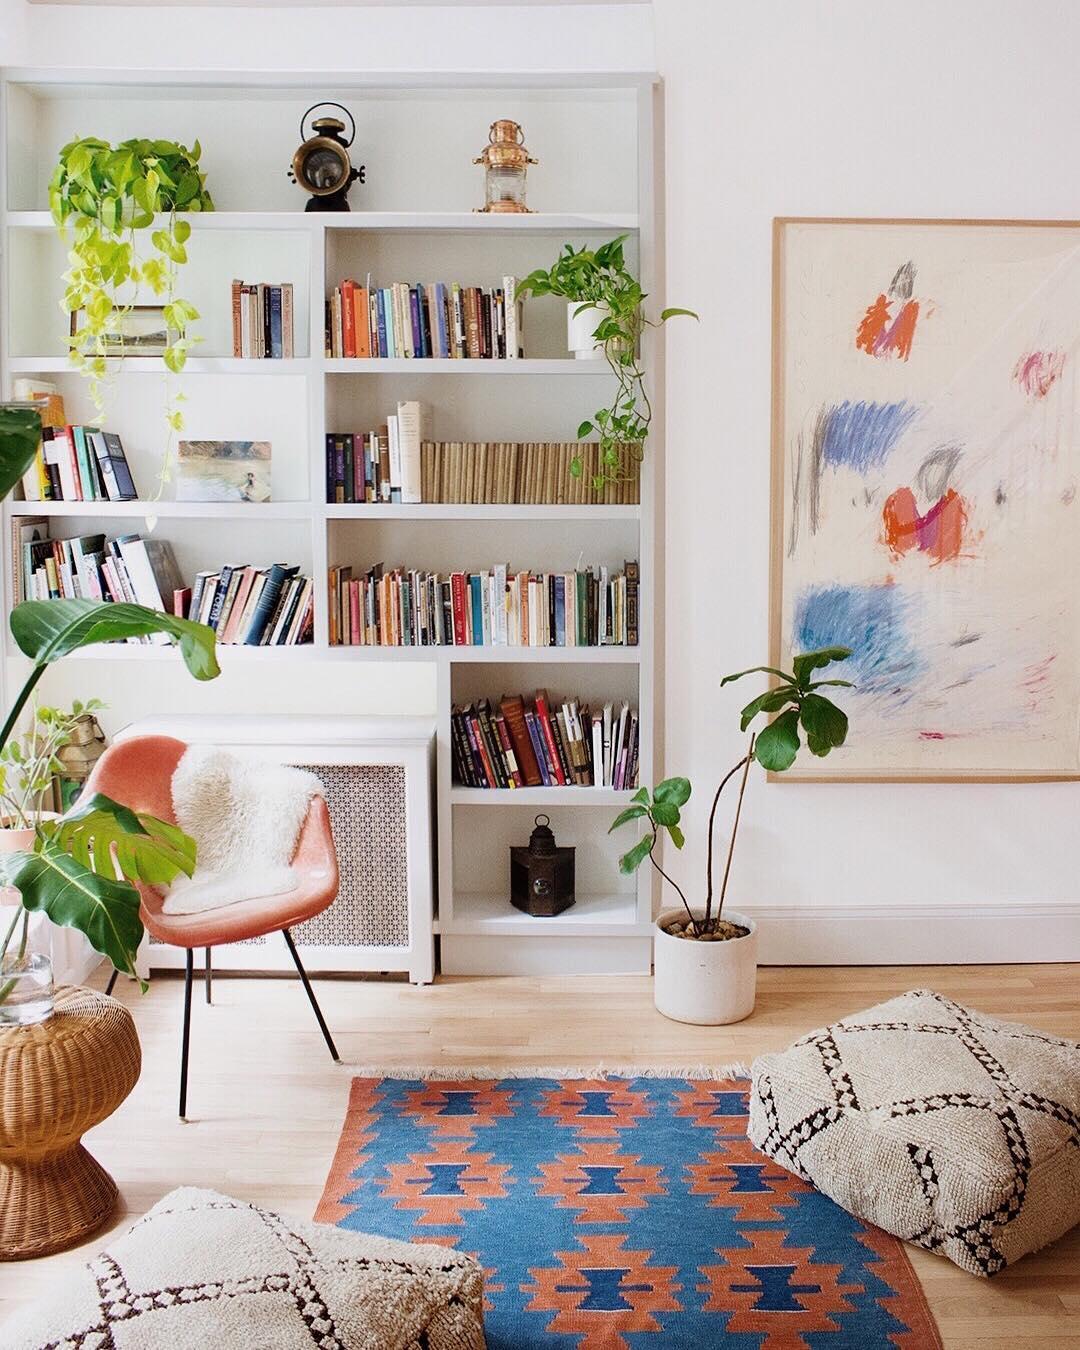 3 Tips on Bringing Moroccan-Inspired Decor to Your Home